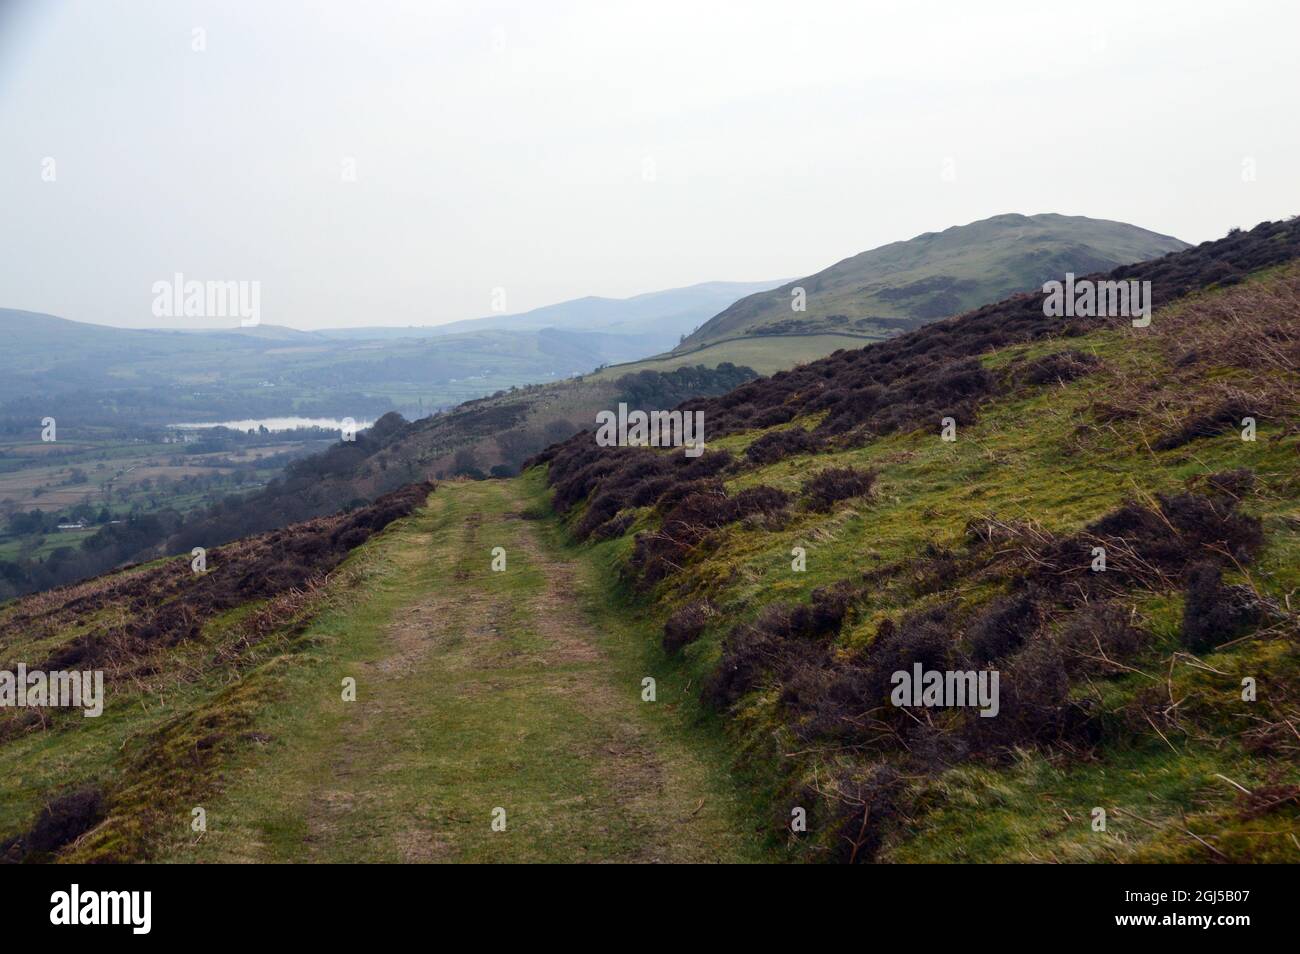 The Old Corpse Road on the Wainwright 'Ling Fell' in the Lake District National Park, Cumbria, England, UK. Stock Photo